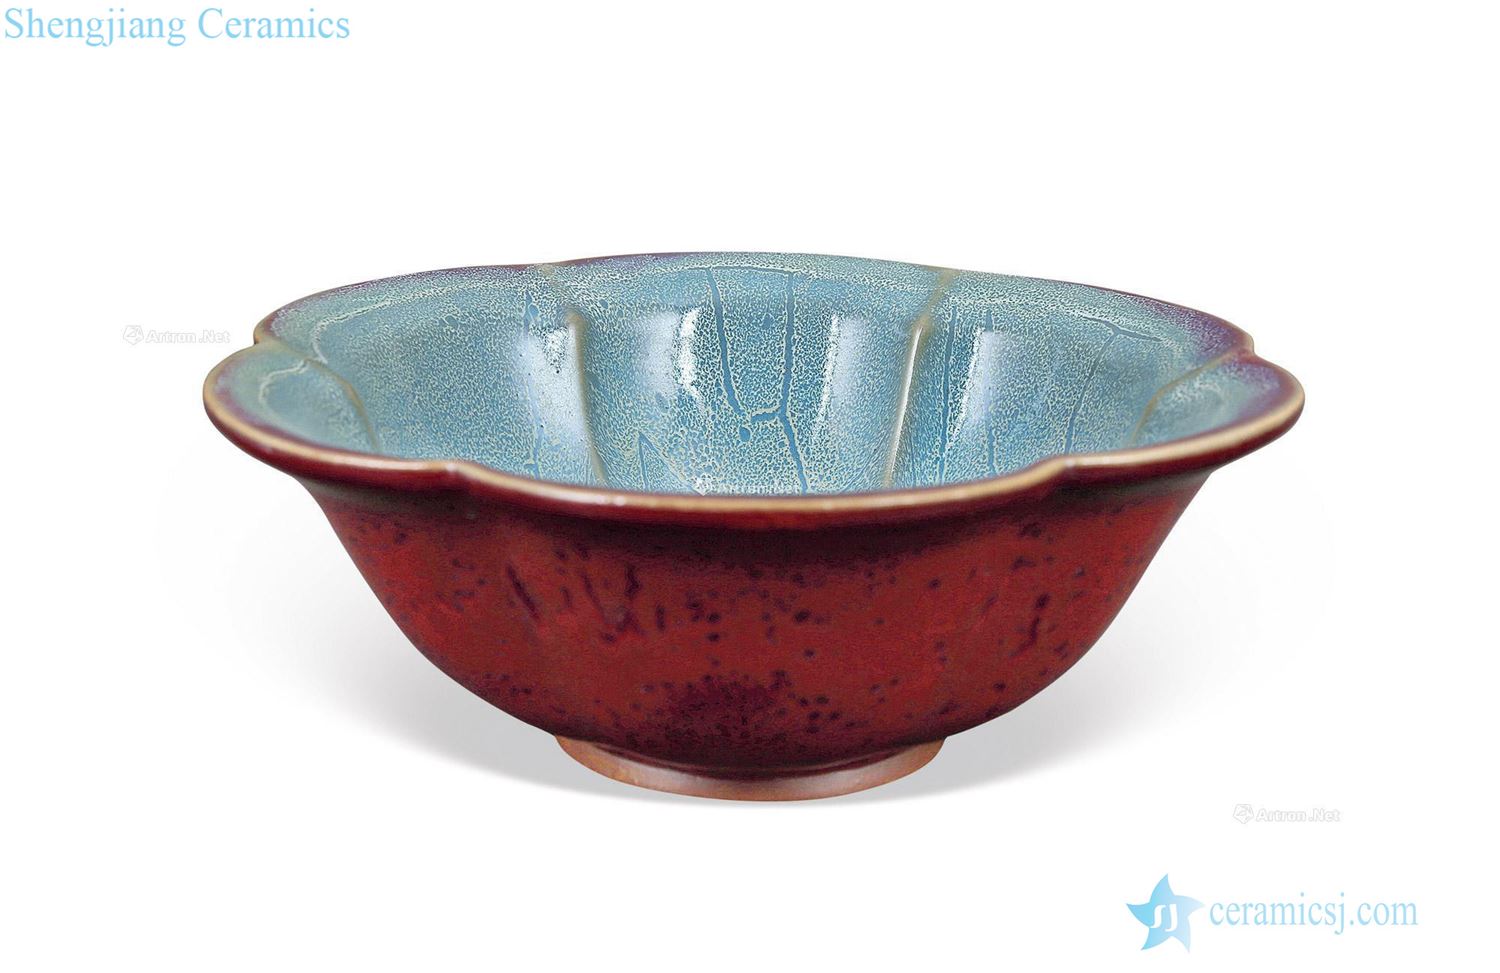 The northern song dynasty rosy kwai mouth bowl masterpieces